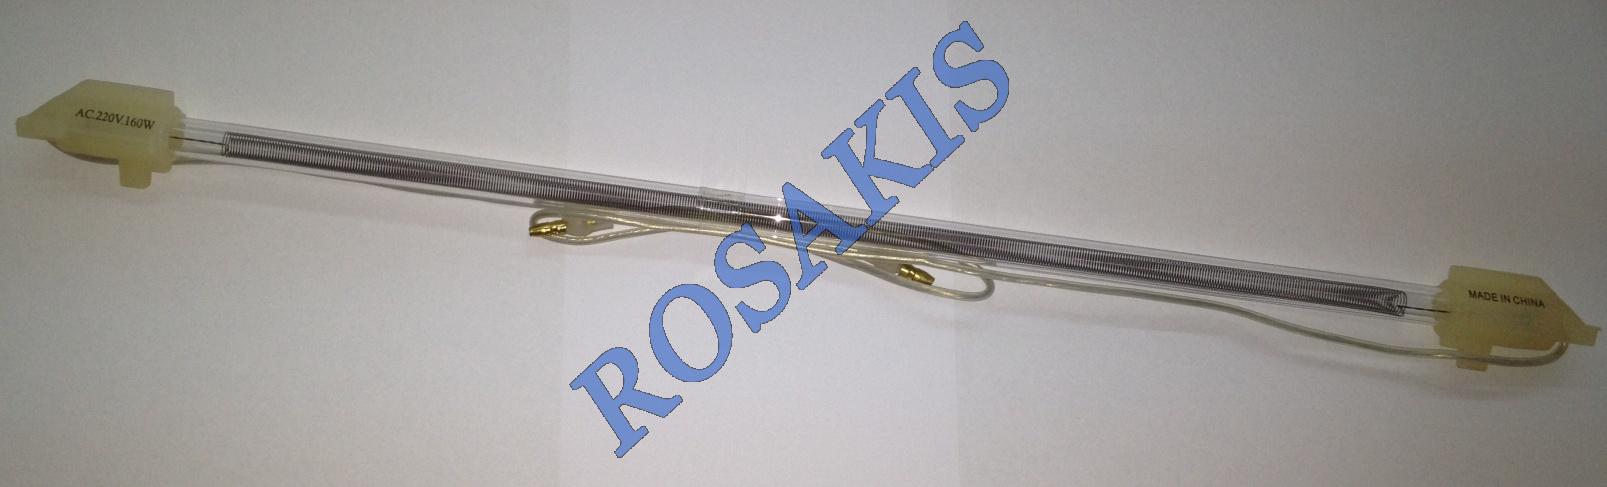 DEFRO.RESIST.GLASS TUBE SAMSUNG-GENERAL ELECTRIC 40,64cm 16IN